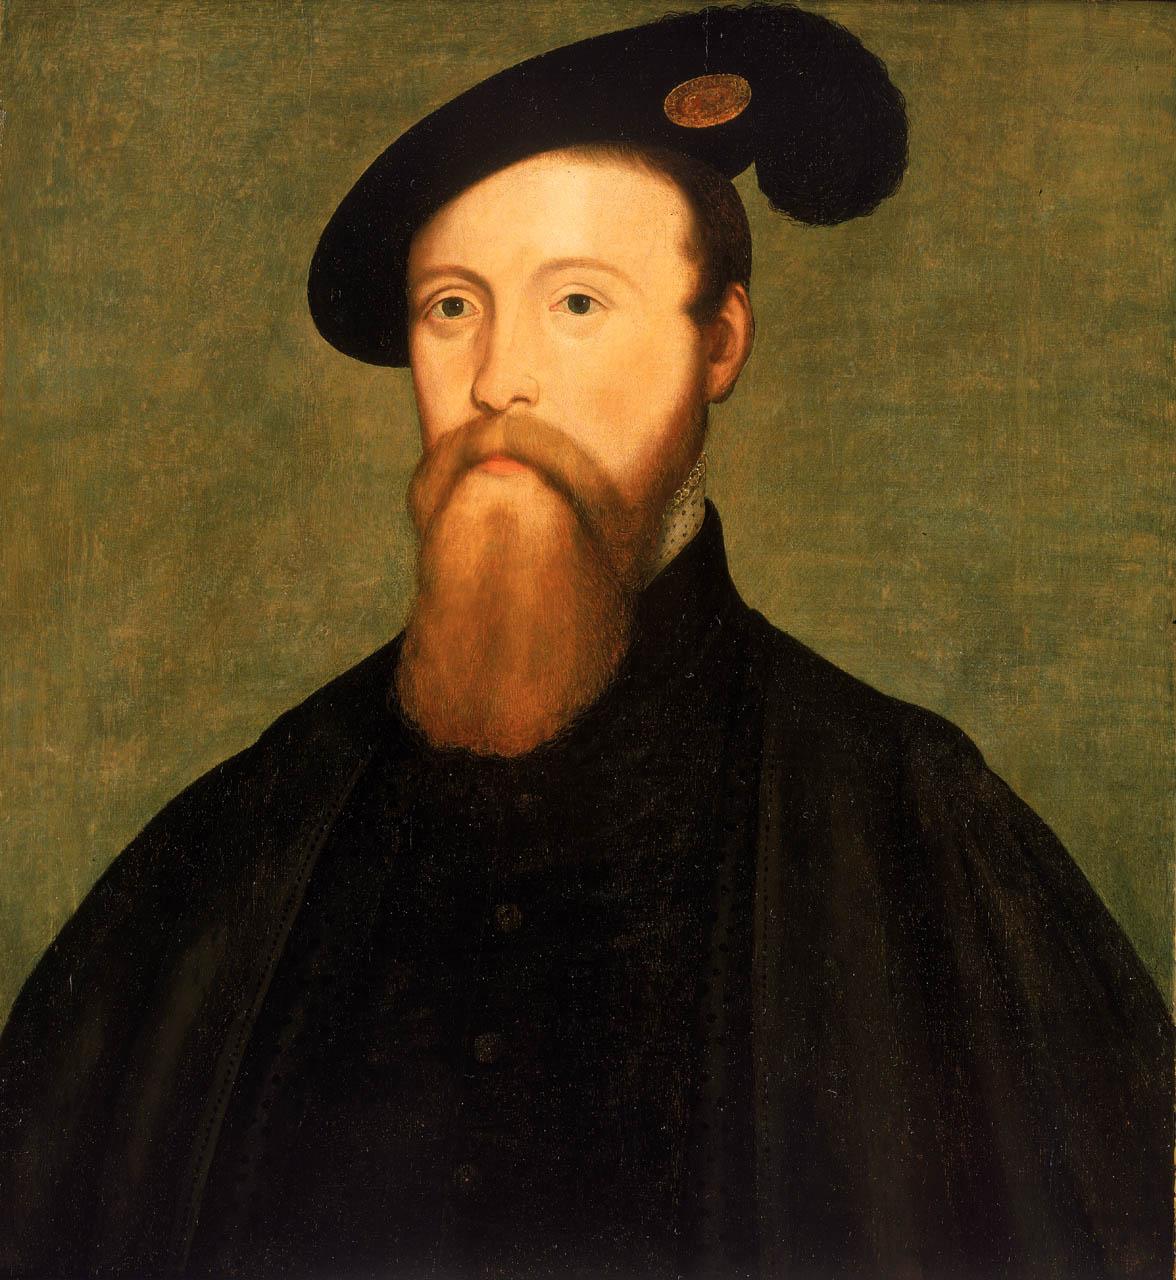 A painting of Thomas Seymour dressed in black with a black hat